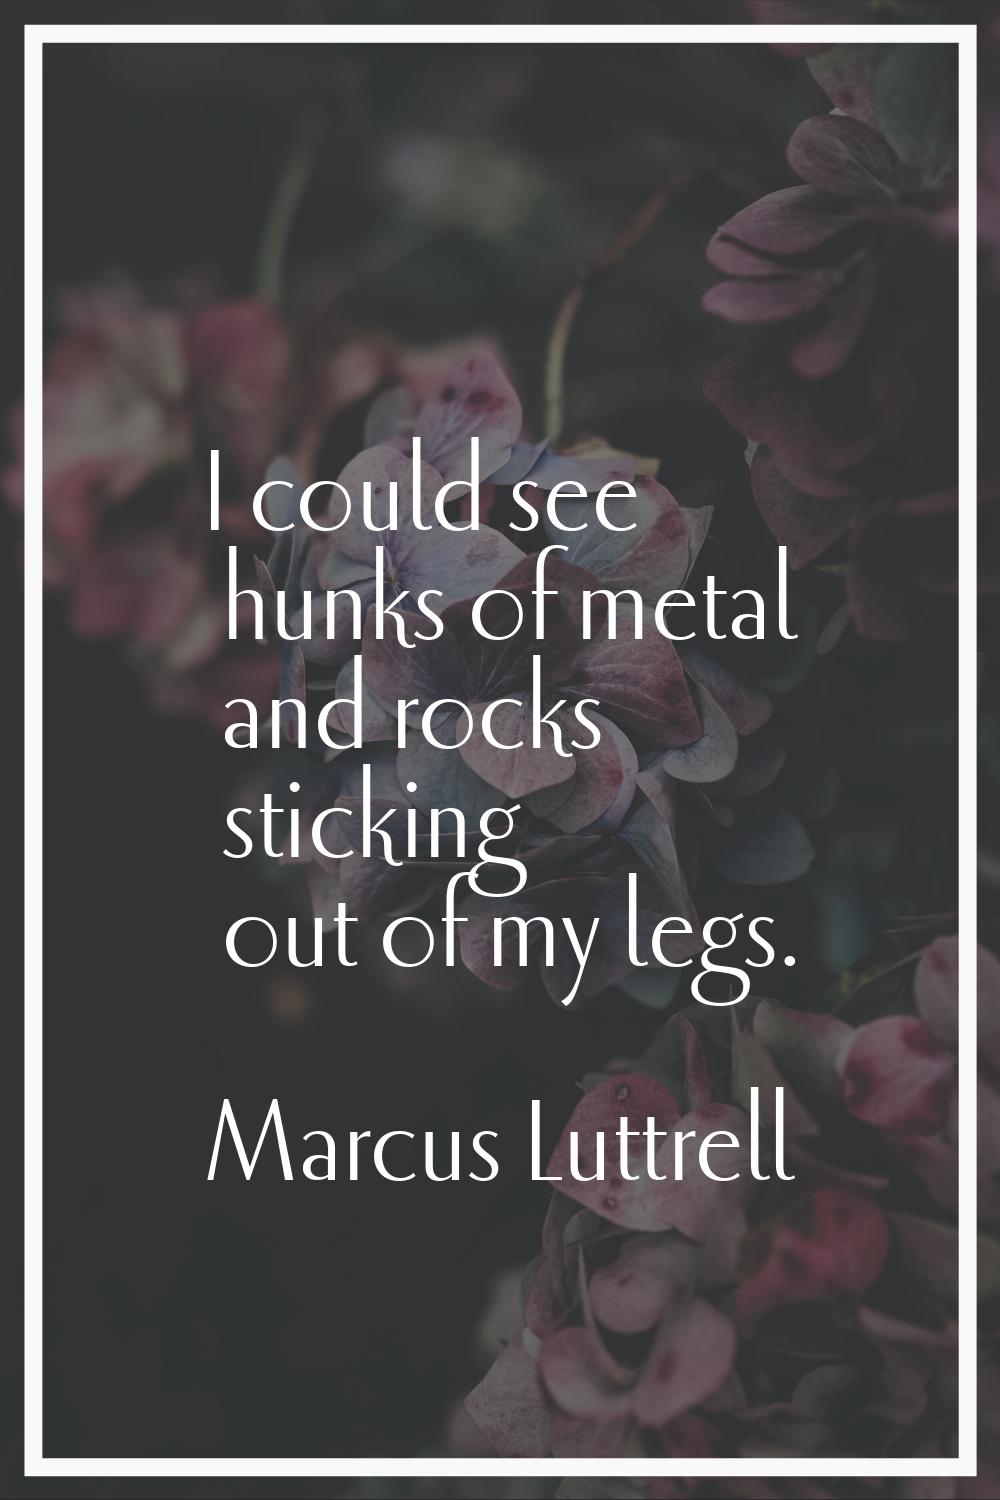 I could see hunks of metal and rocks sticking out of my legs.